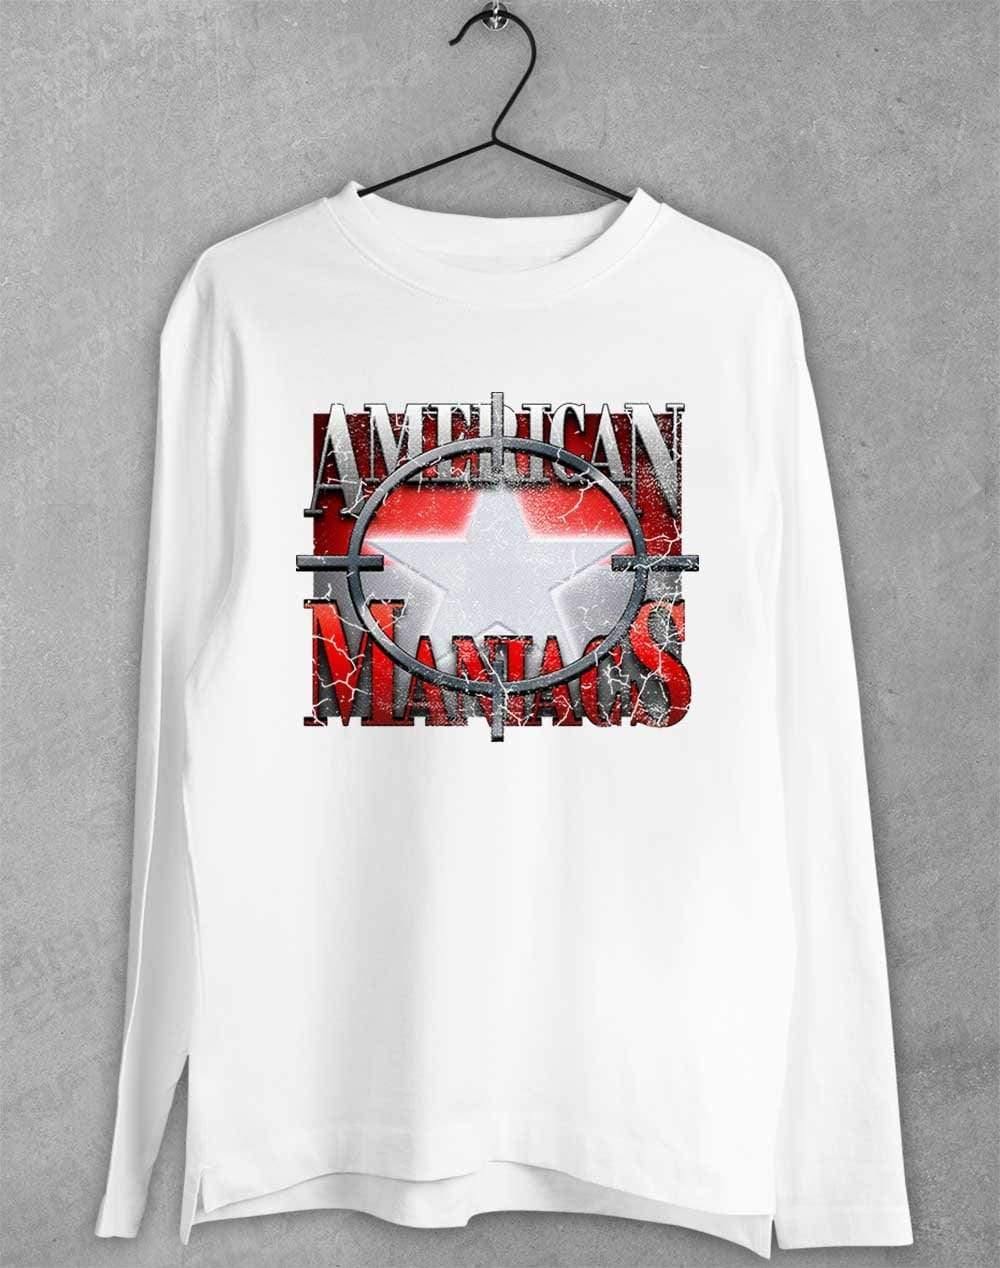 American Maniacs - Long Sleeve T-Shirt S / White  - Off World Tees